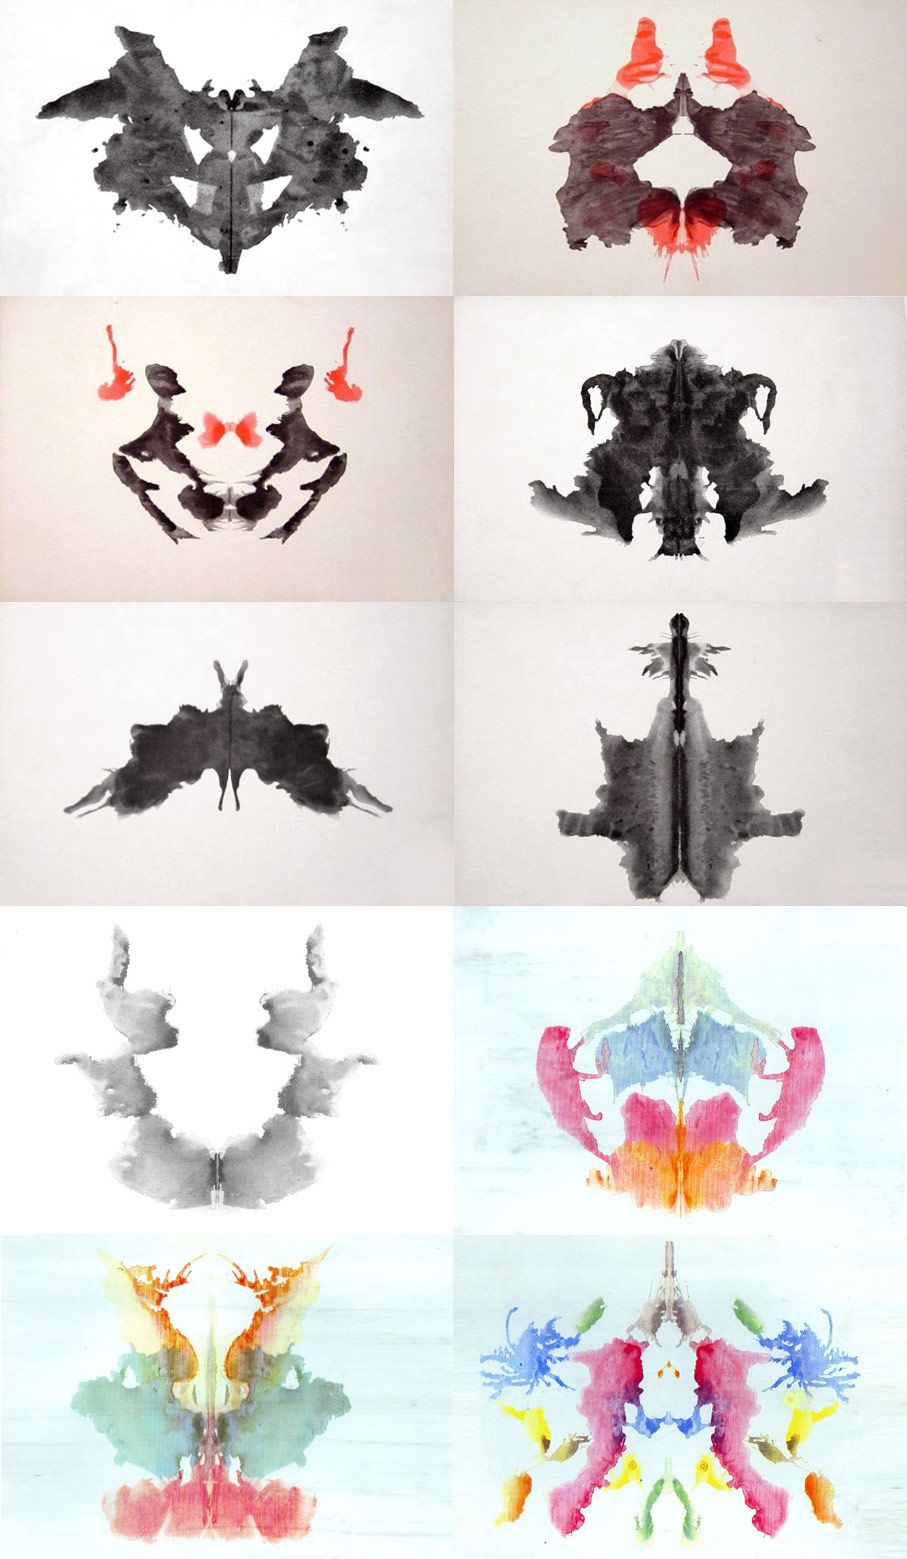 rorschach test results meaning